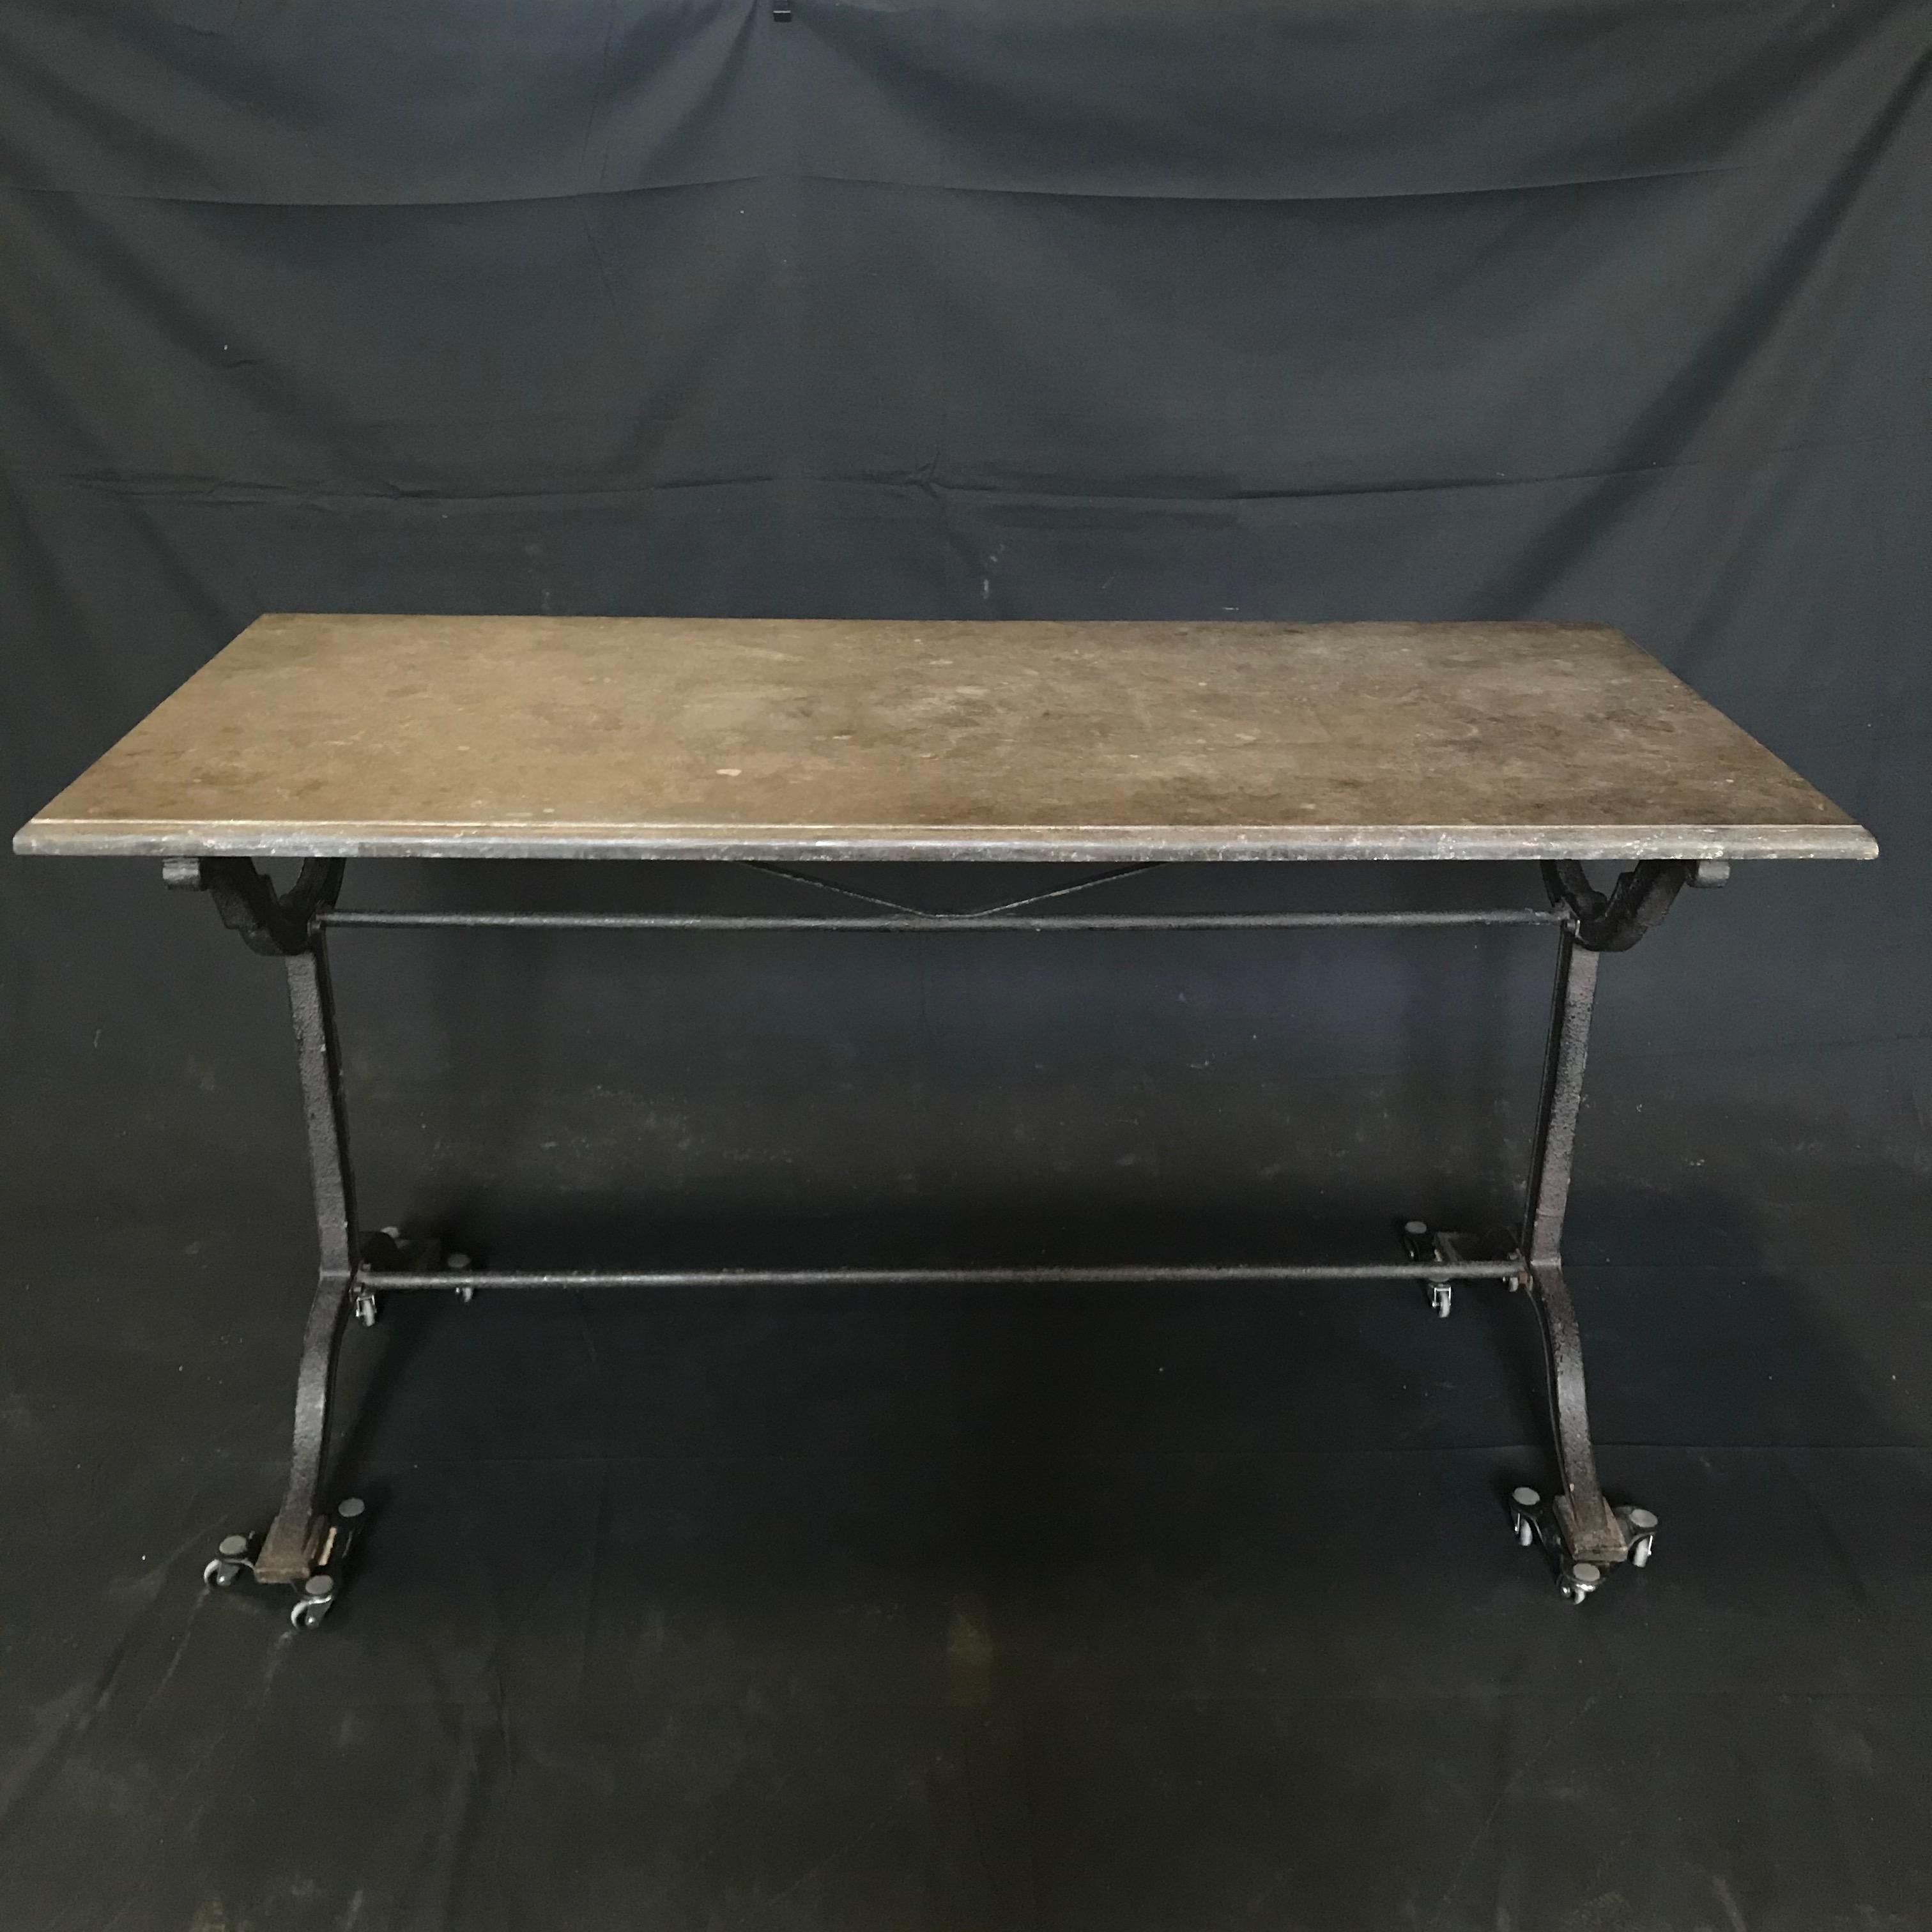 A classic French iron bistro table with grey stone top by L. Buchon, circa 1900. Weathered original gray stone top rests over a shapely wrought iron base from the St. Etienne, France. Elegantly curved stretchers add grace and allow for nice leg